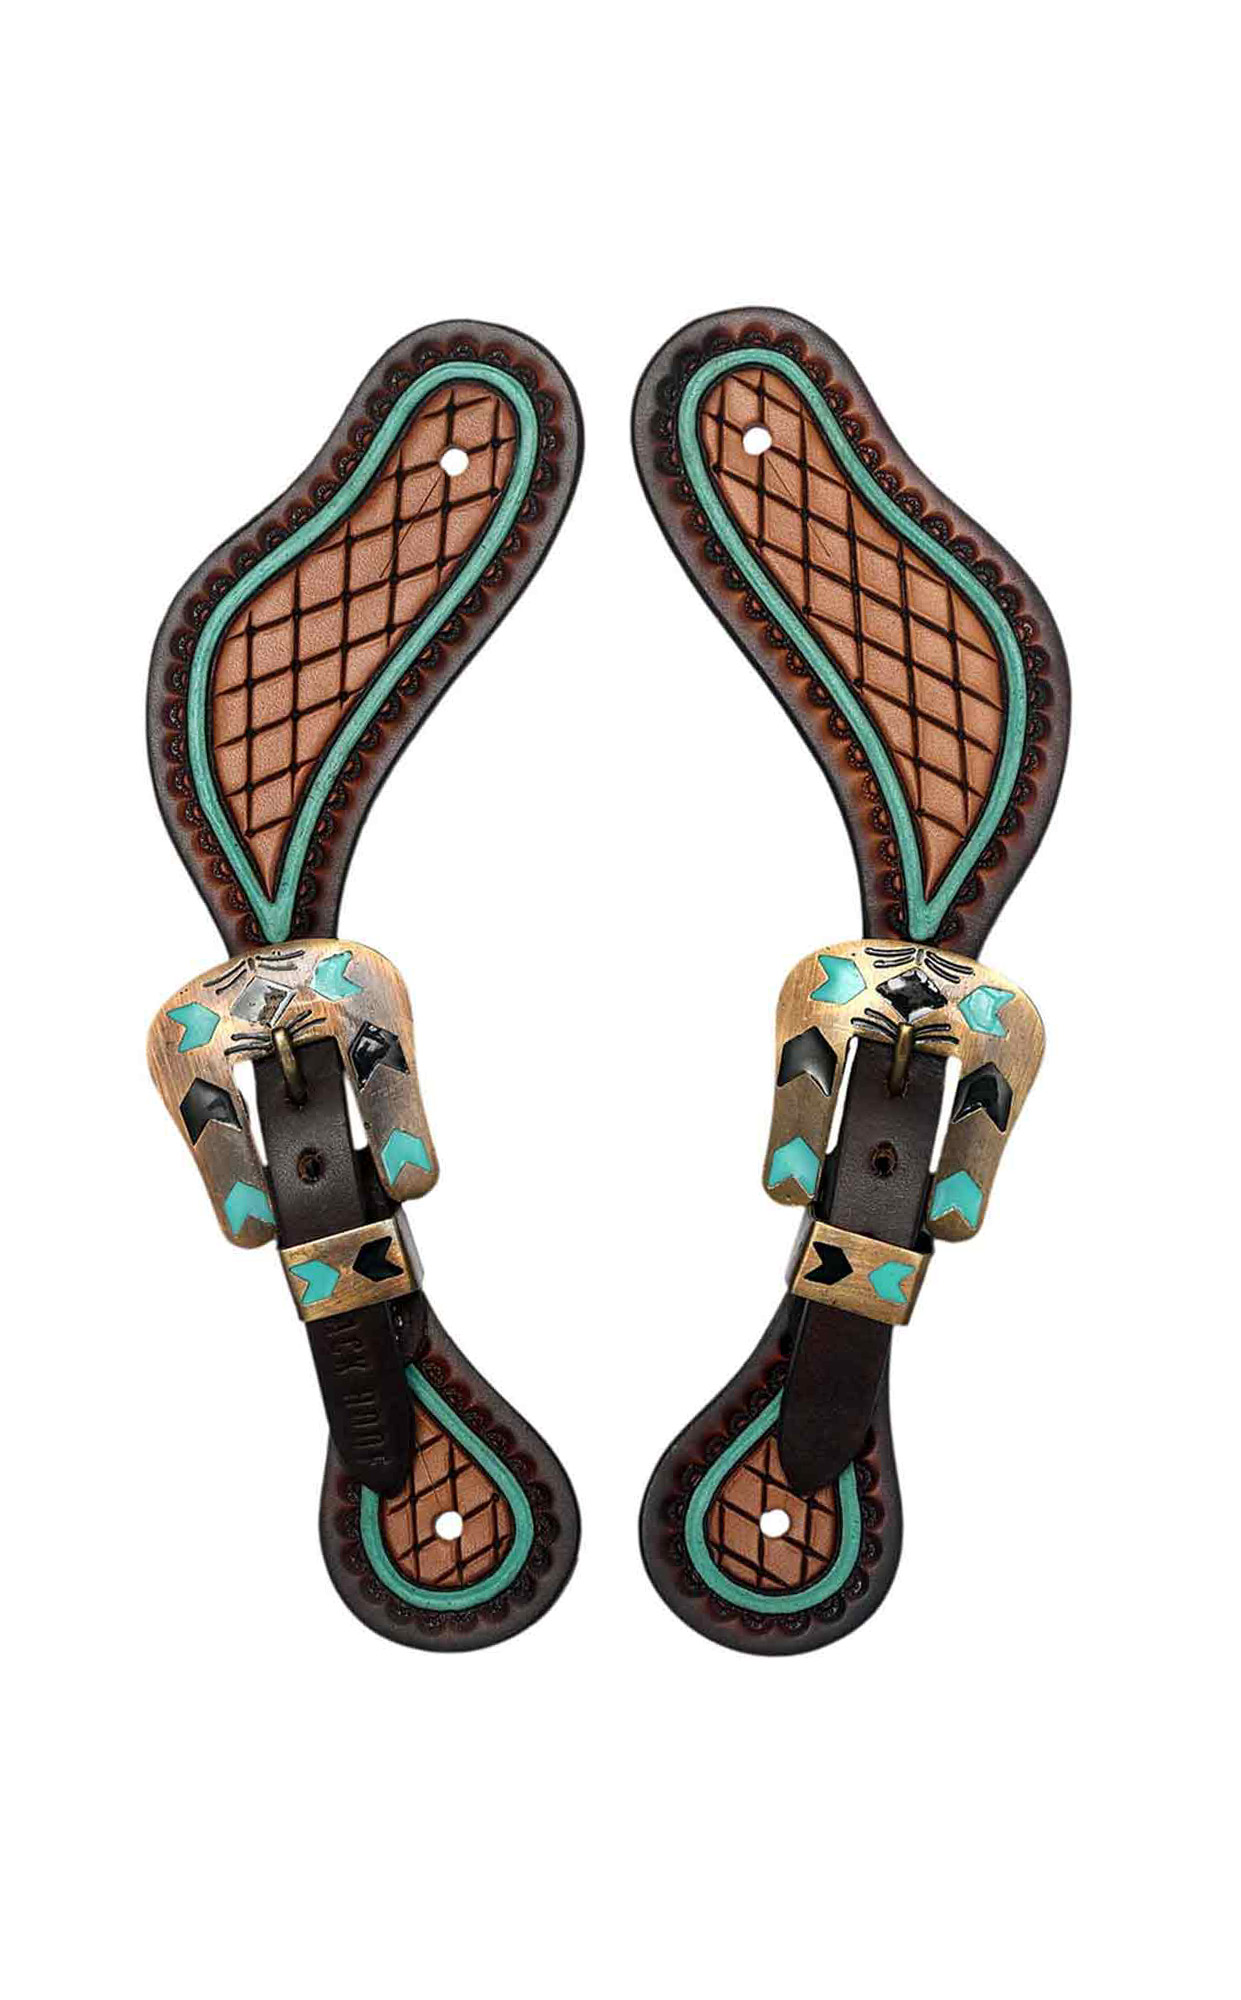 Black Hoof | Turquoise Arrow Buckle Spur Straps  for Horse Riders | Western Men, Women, Adjustable Single Ply Spur Straps | Equestrian Accessories